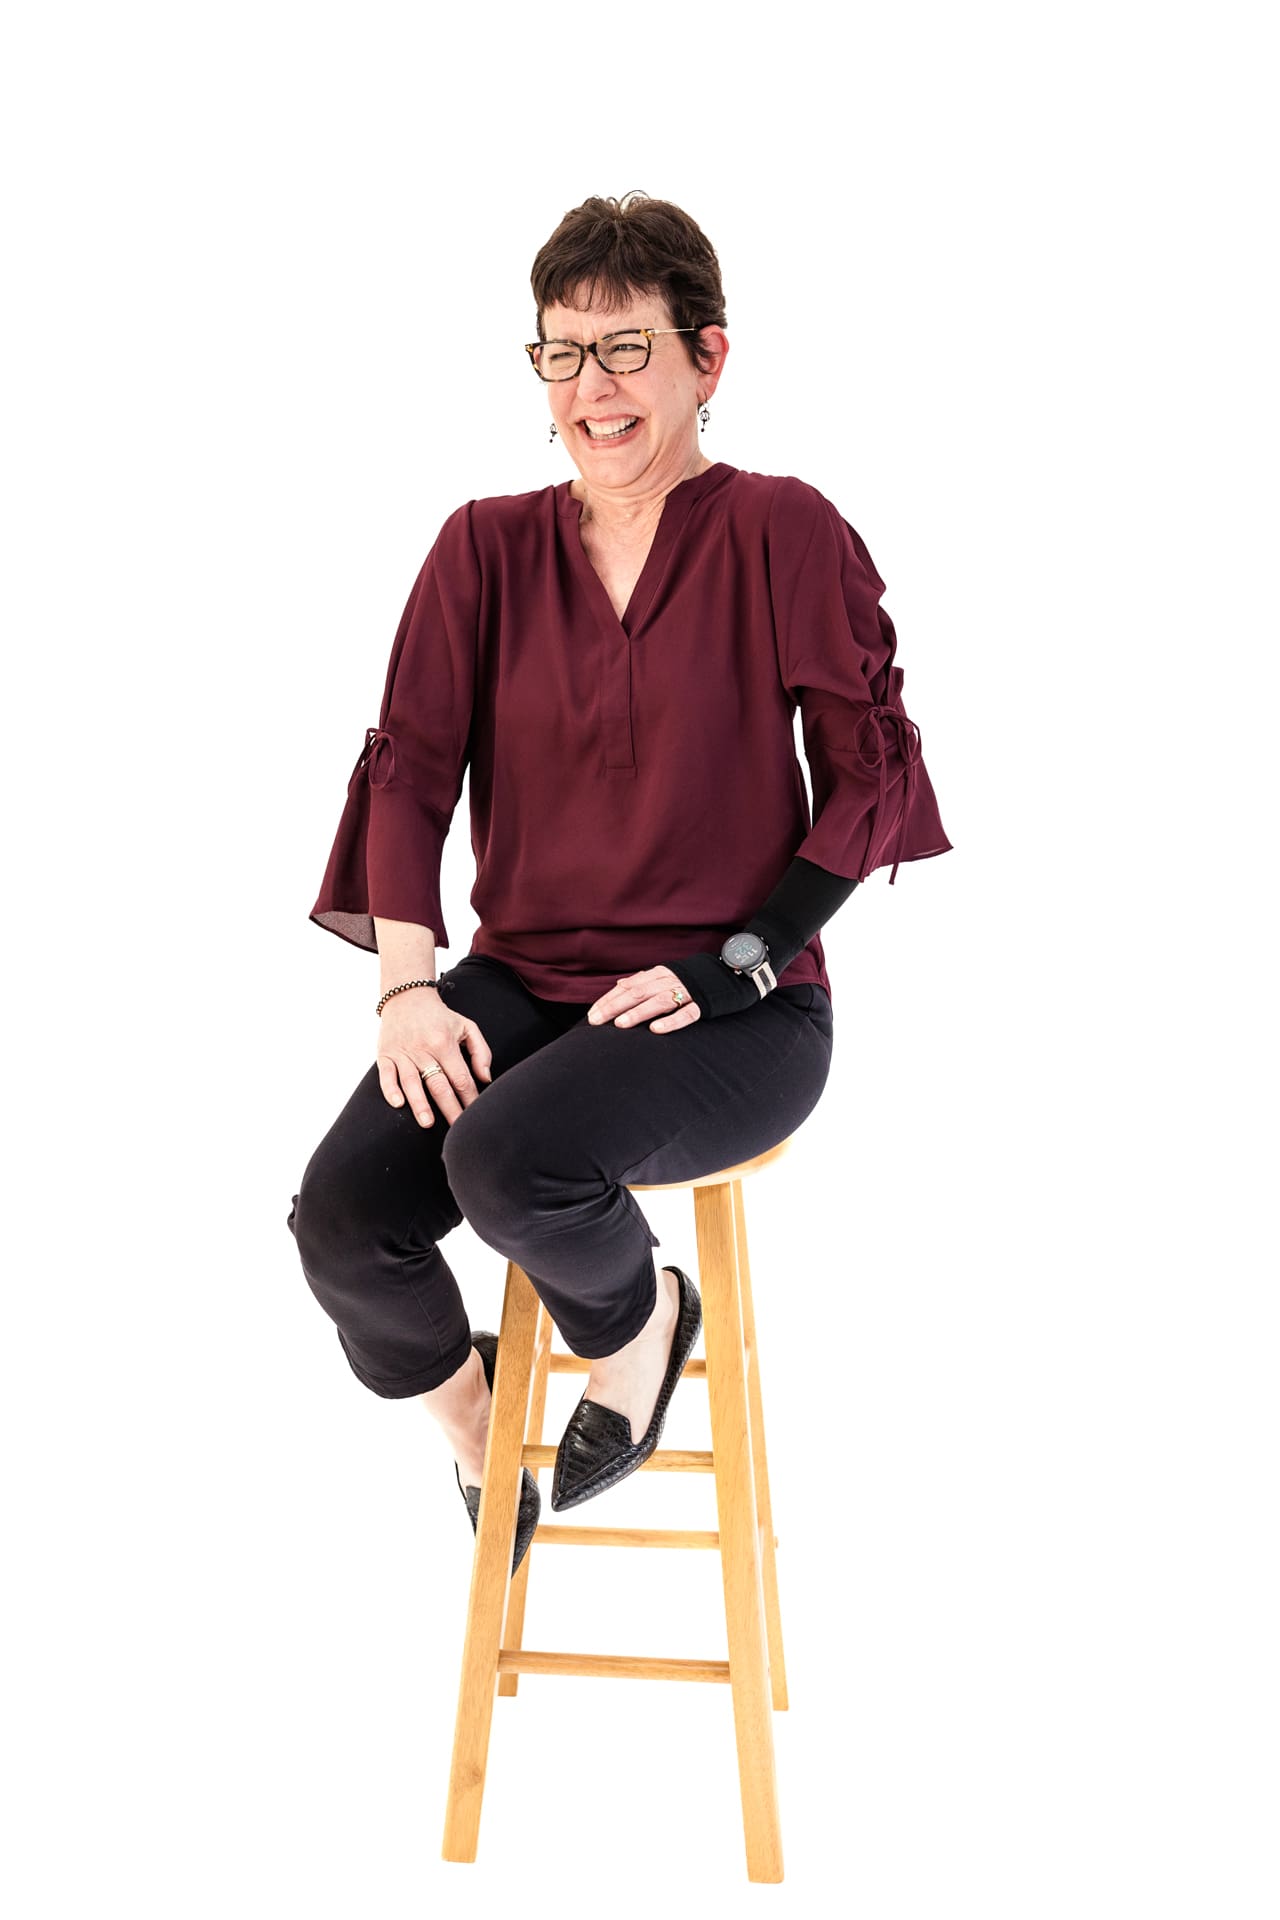 Candid studio portrait of woman laughing while sitting on stool with white backdrop at Chicago photography studio P&M Studio